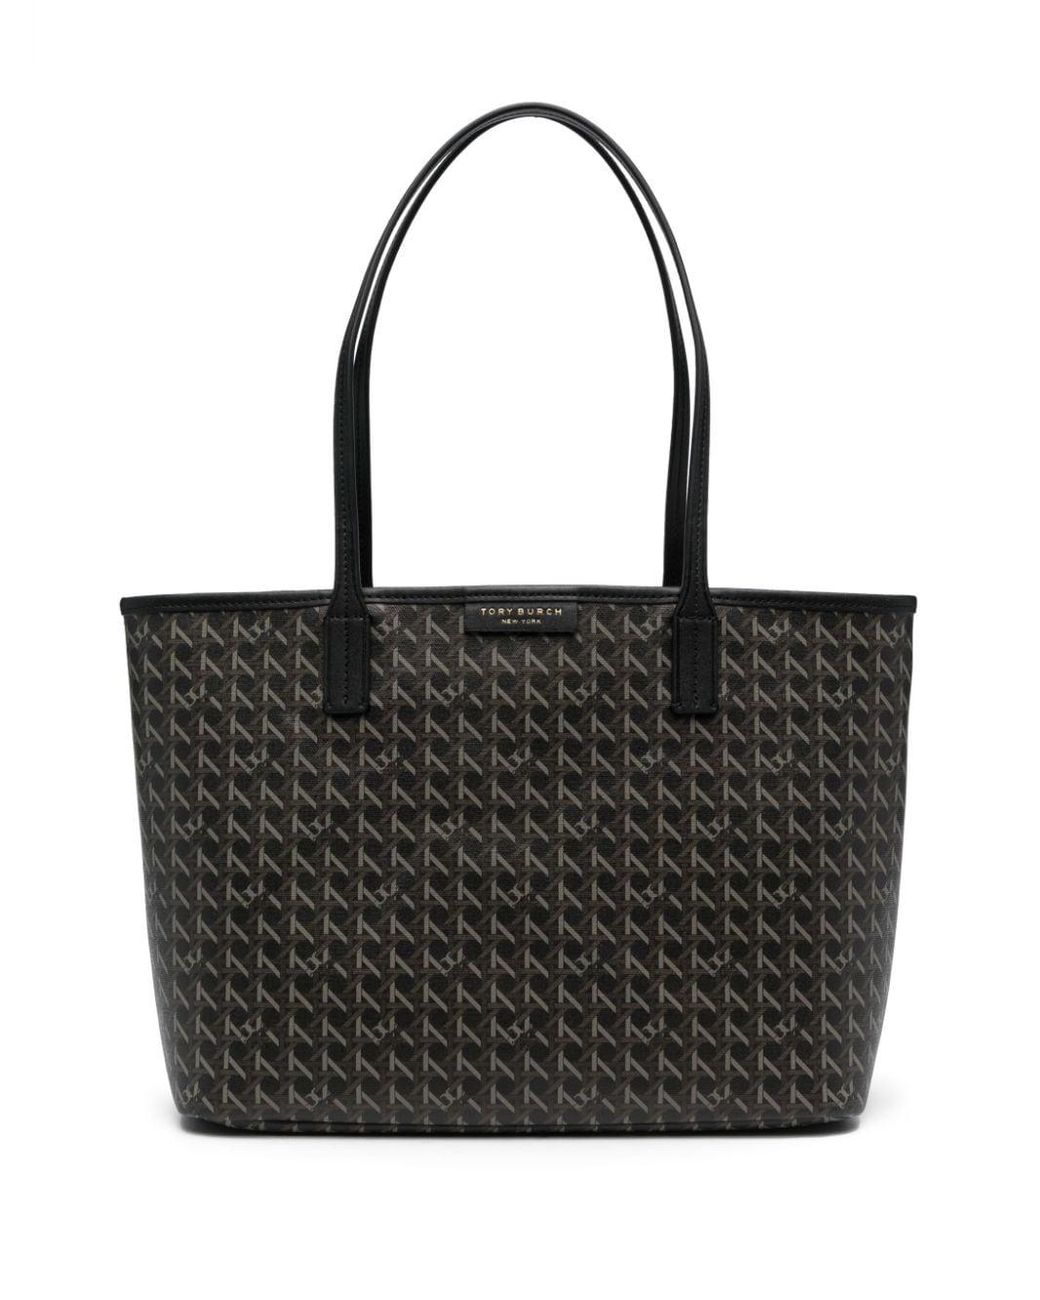 Tory Burch Large Ever-ready Canvas Tote Bag in Black | Lyst